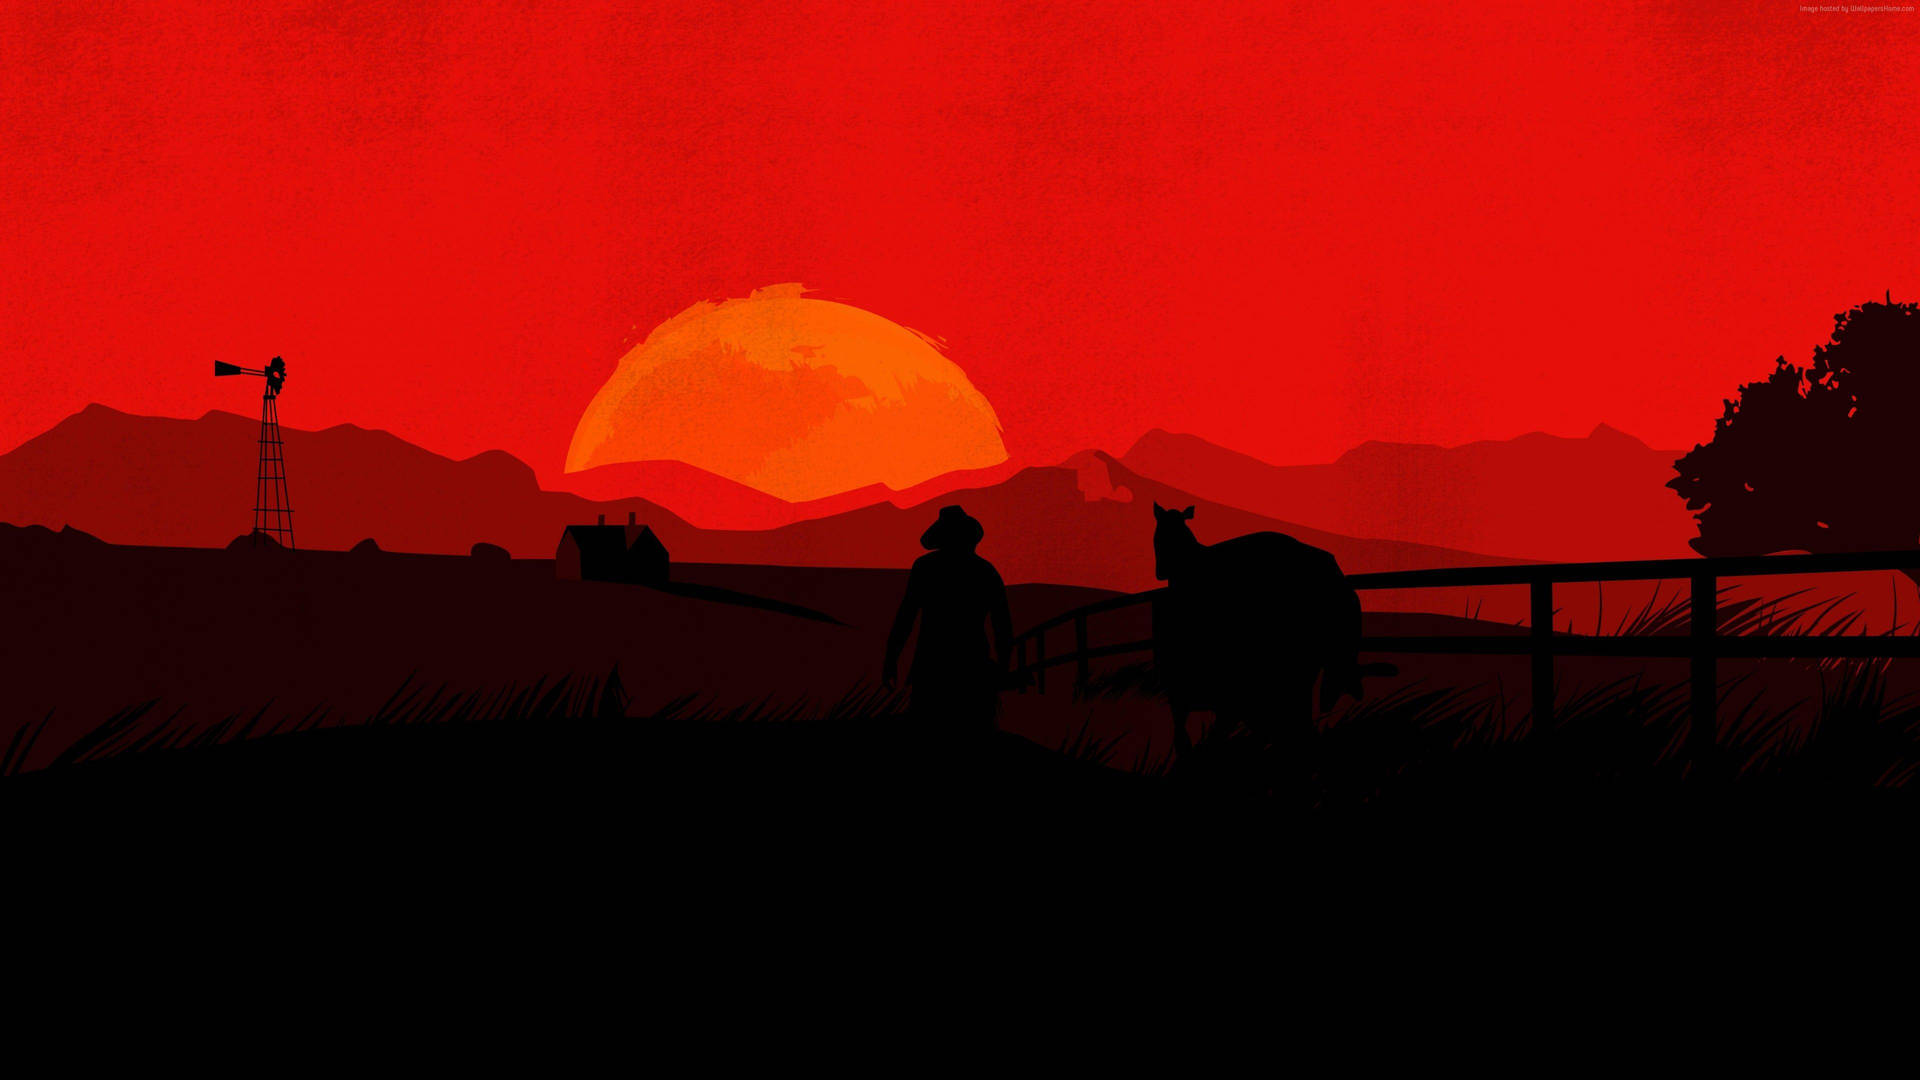 3840X2160 Red Dead Redemption 2 Wallpaper and Background